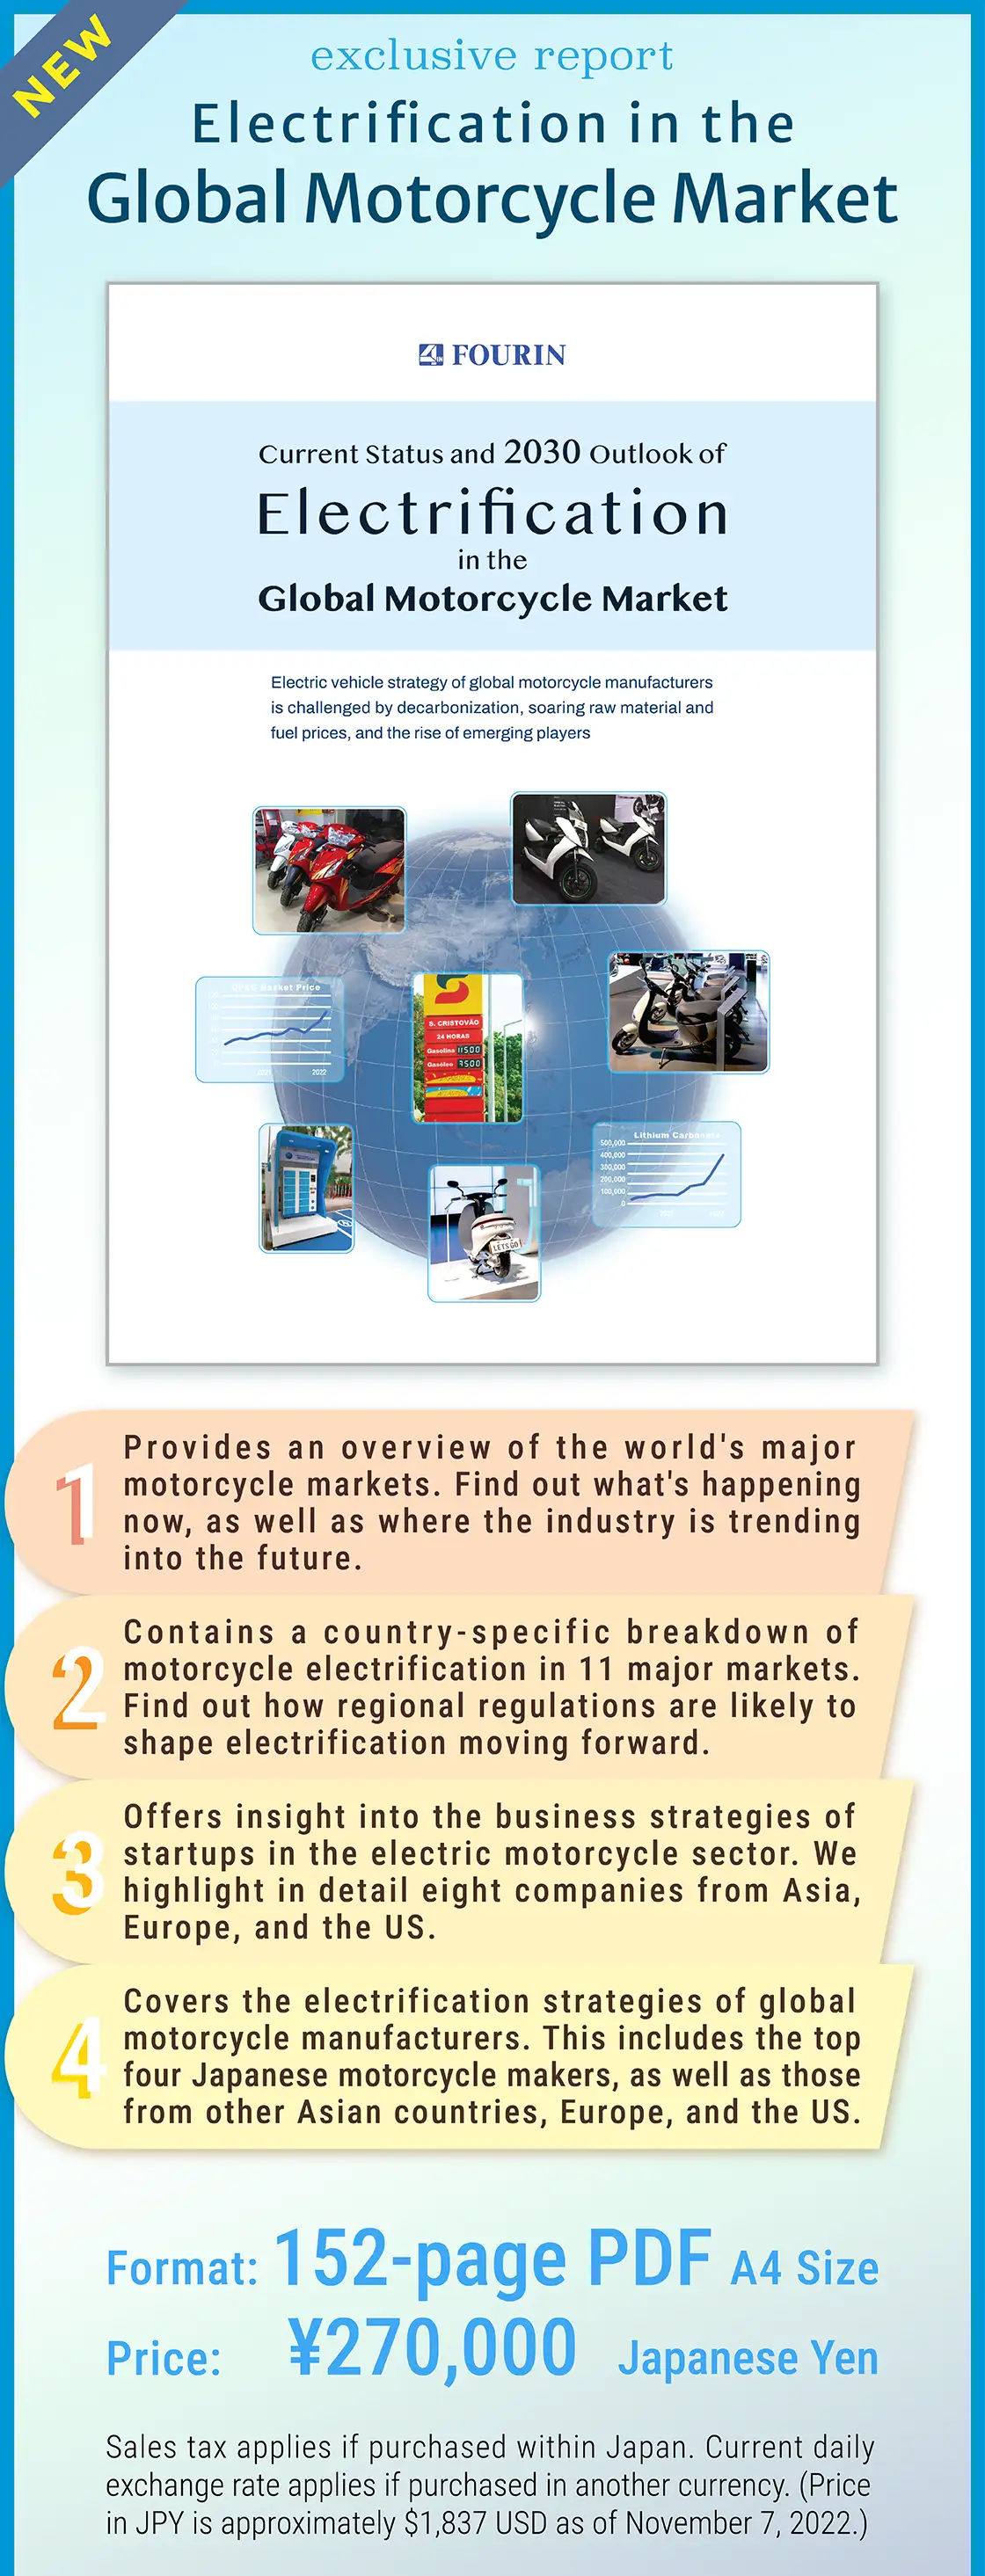 Current Status and 2030 Outlook of Electrification in the Global Motorcycle Market - click to go to our publication order page